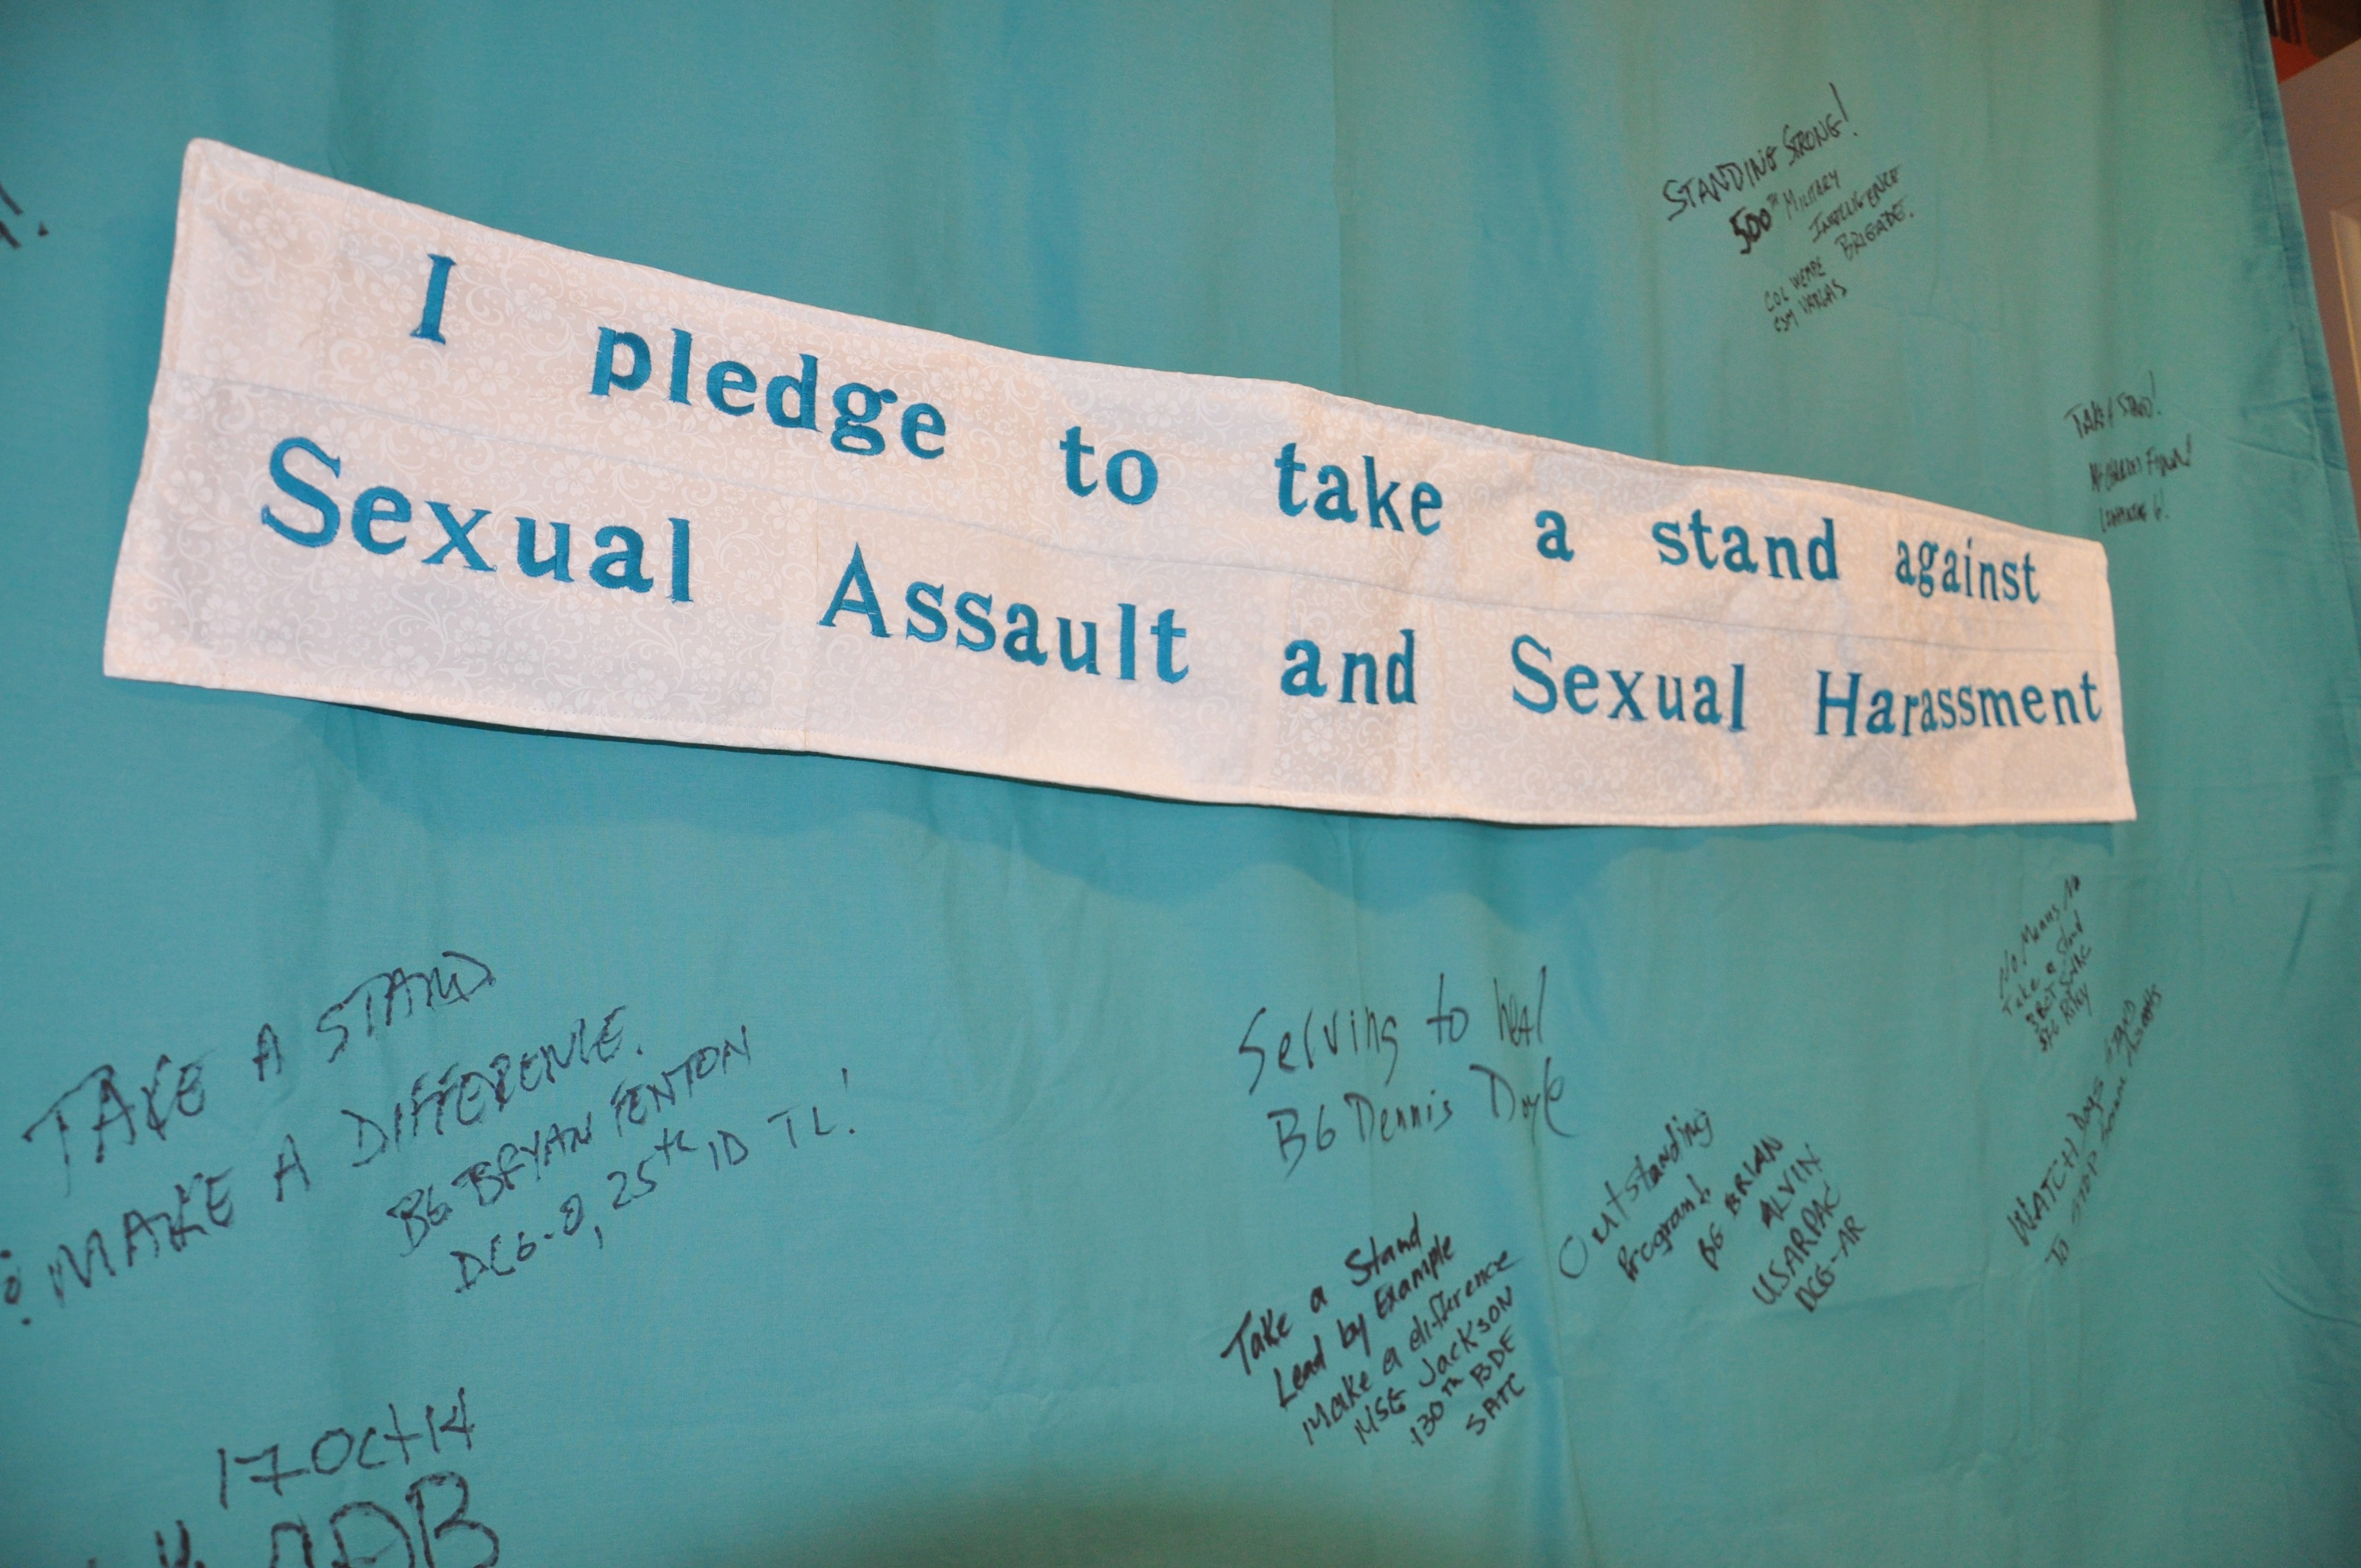 Believing Assisting Sexual Assault Victims Is Important Article The United States Army 